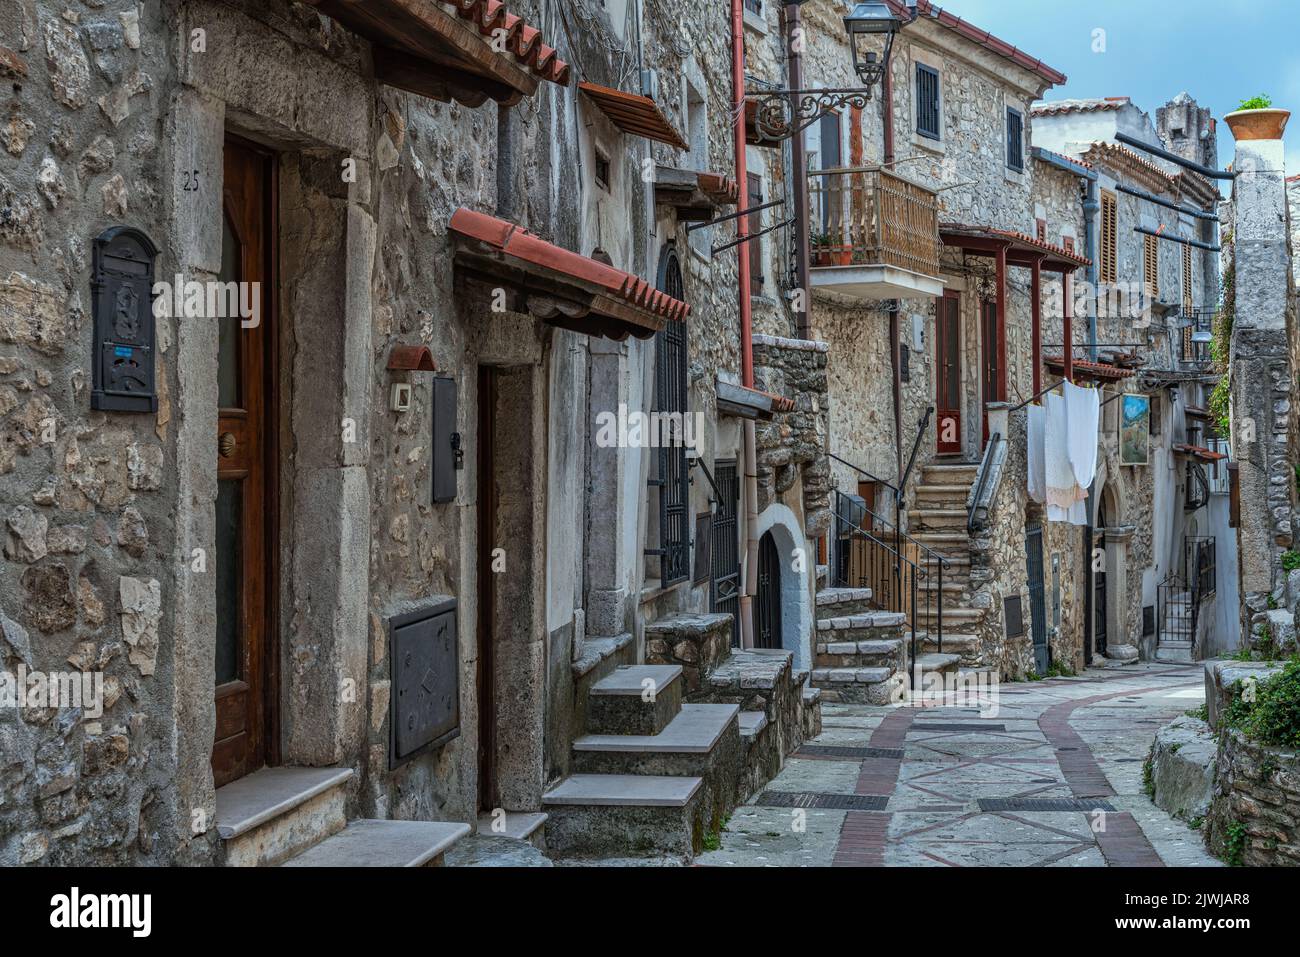 Old and ancient alleys of the medieval village of Vico del Gargano. Characteristic are the narrow steps to access the houses. Vico del Gargano, Puglia Stock Photo